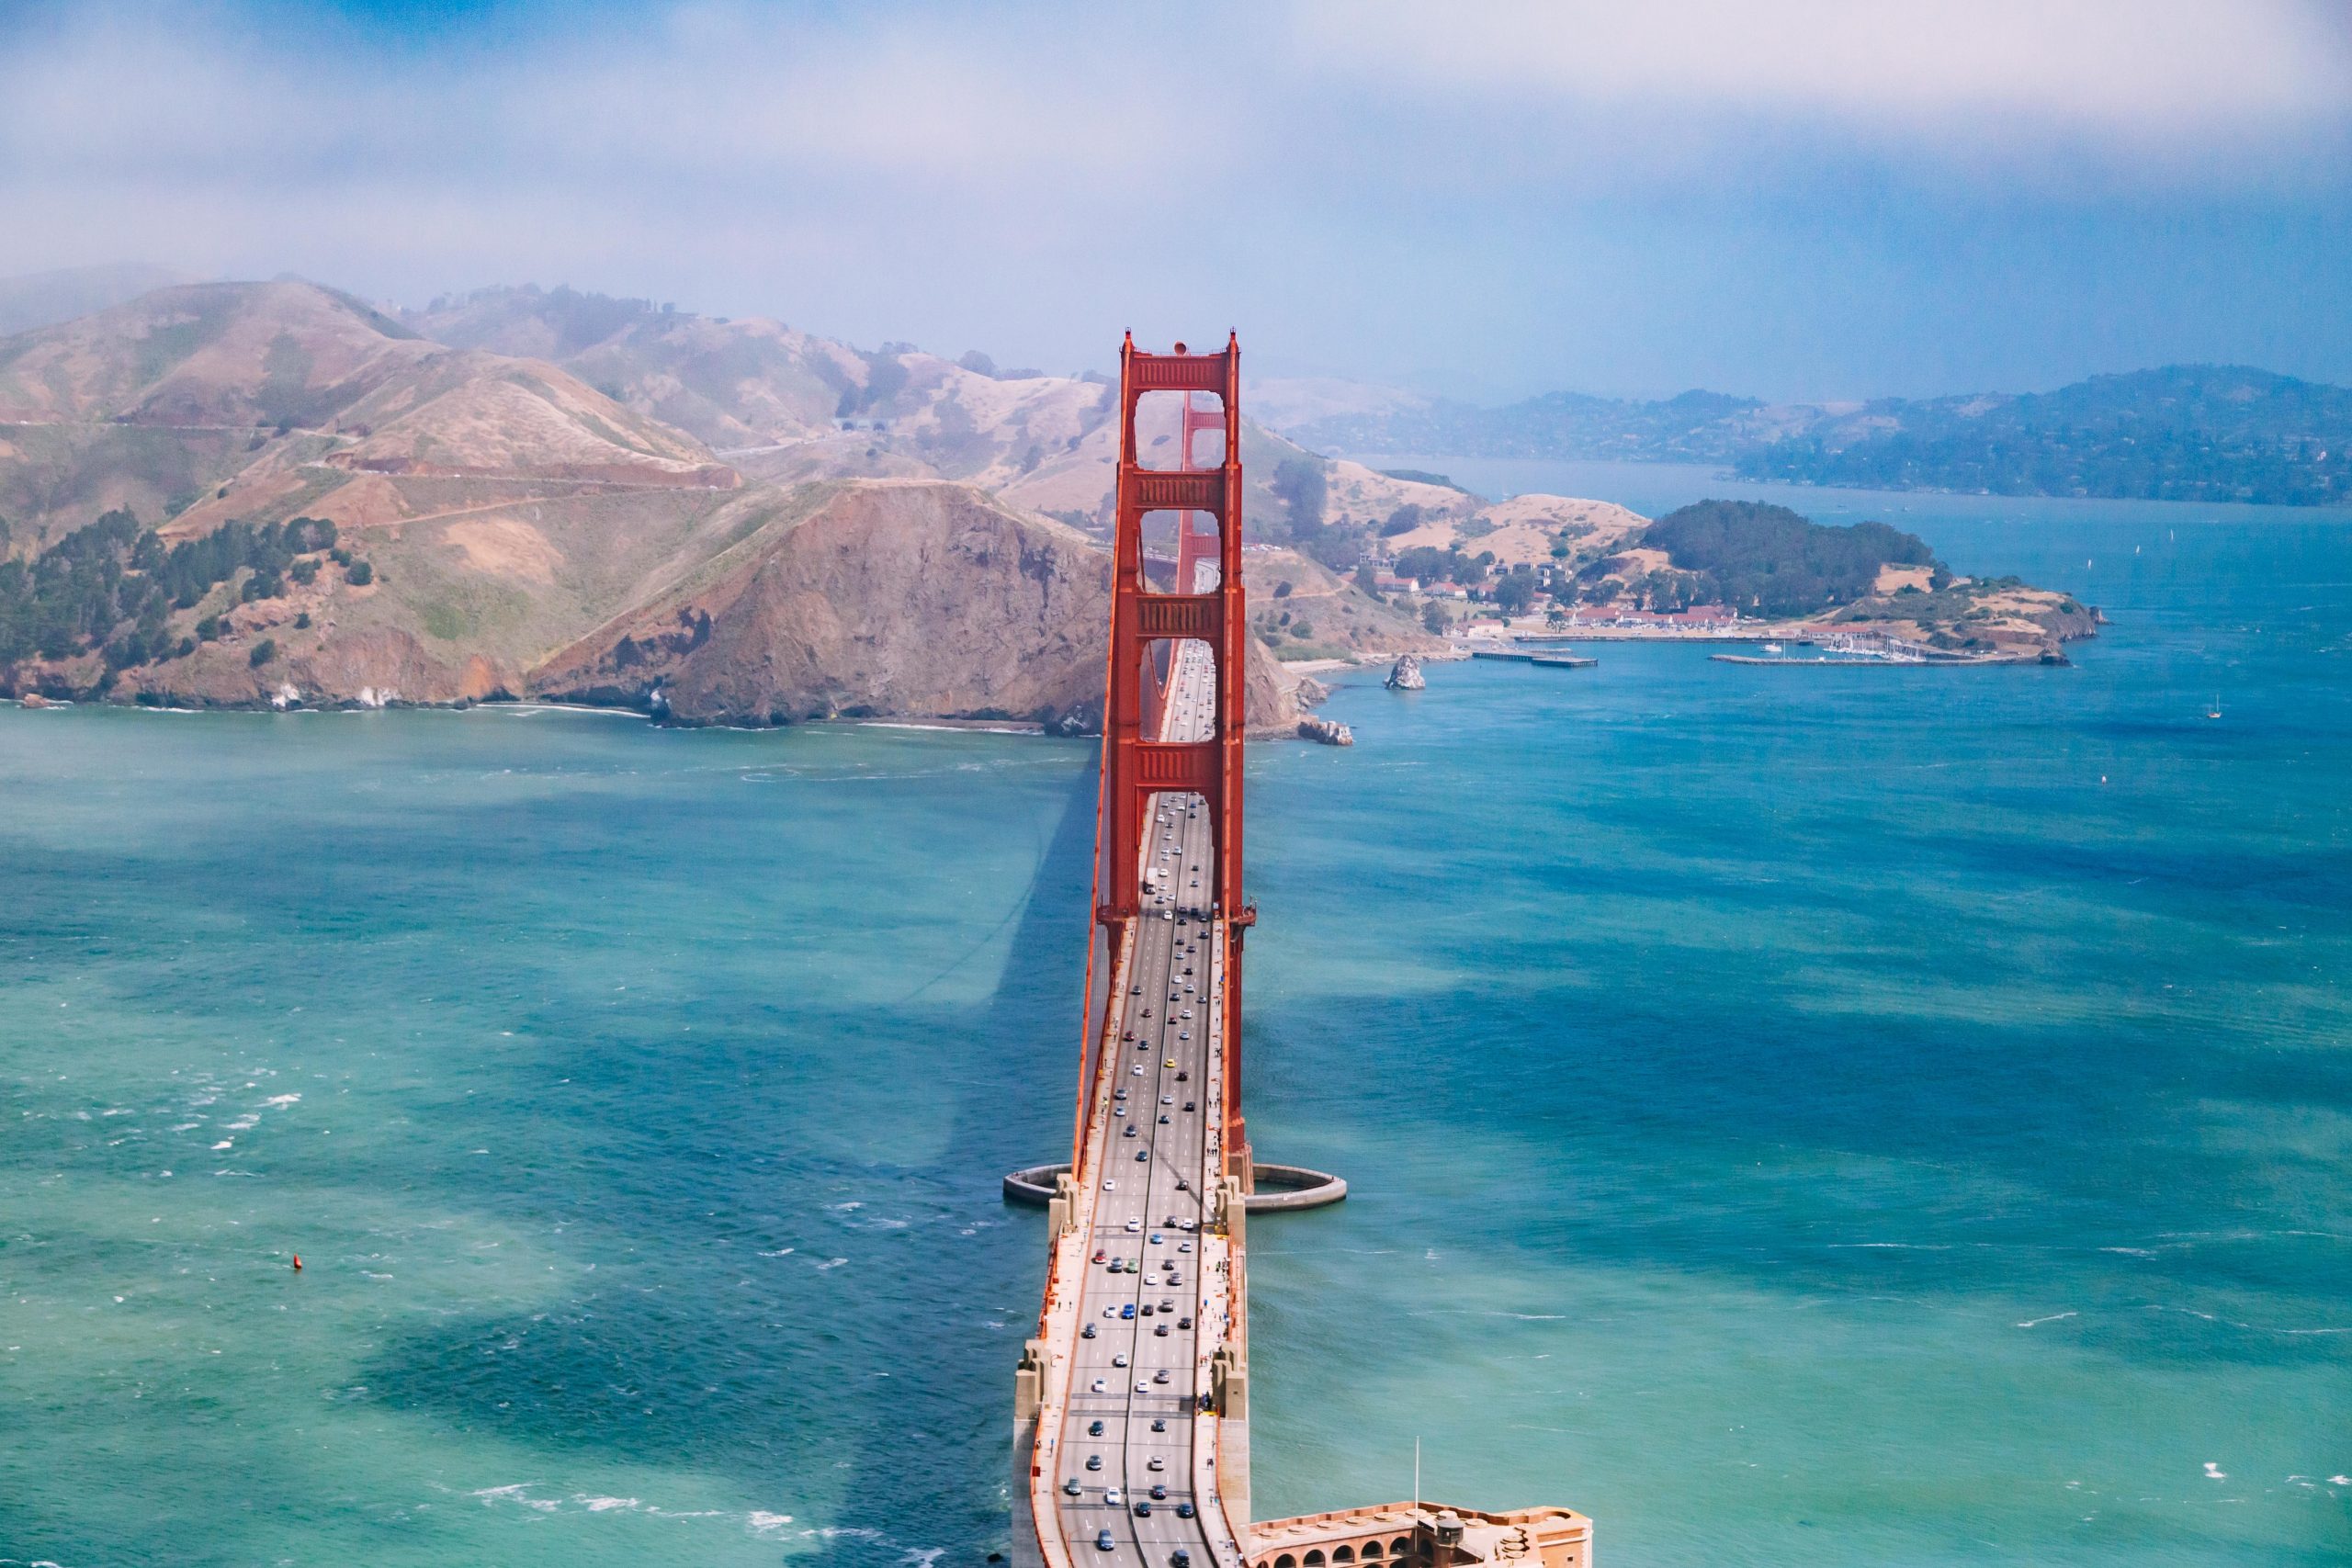 Crossing the golden gate bridge for day trips from San Francisco